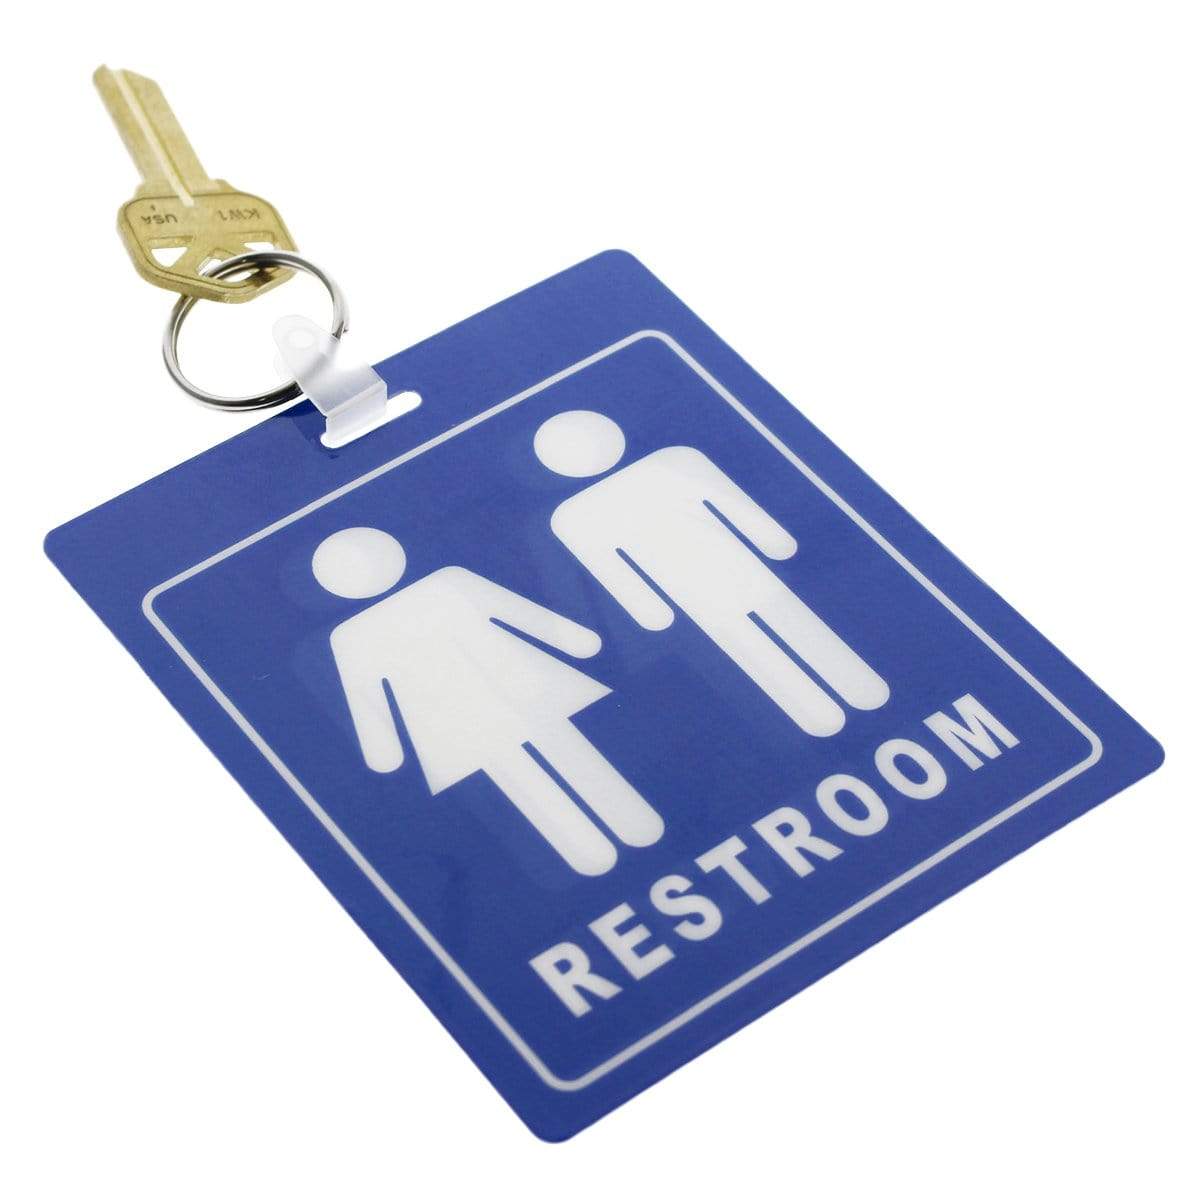 A restroom key attached to a keychain with a blue sign showing male and female restroom symbols serves as a convenient Unisex Restroom Pass Keychain - Bathroom Tag with Key Chain Ring - Heavy Duty Large Passes for Unisex & Family Restrooms with Key Holder (Sold in 2 Pack) (SPID-9840-Blue).